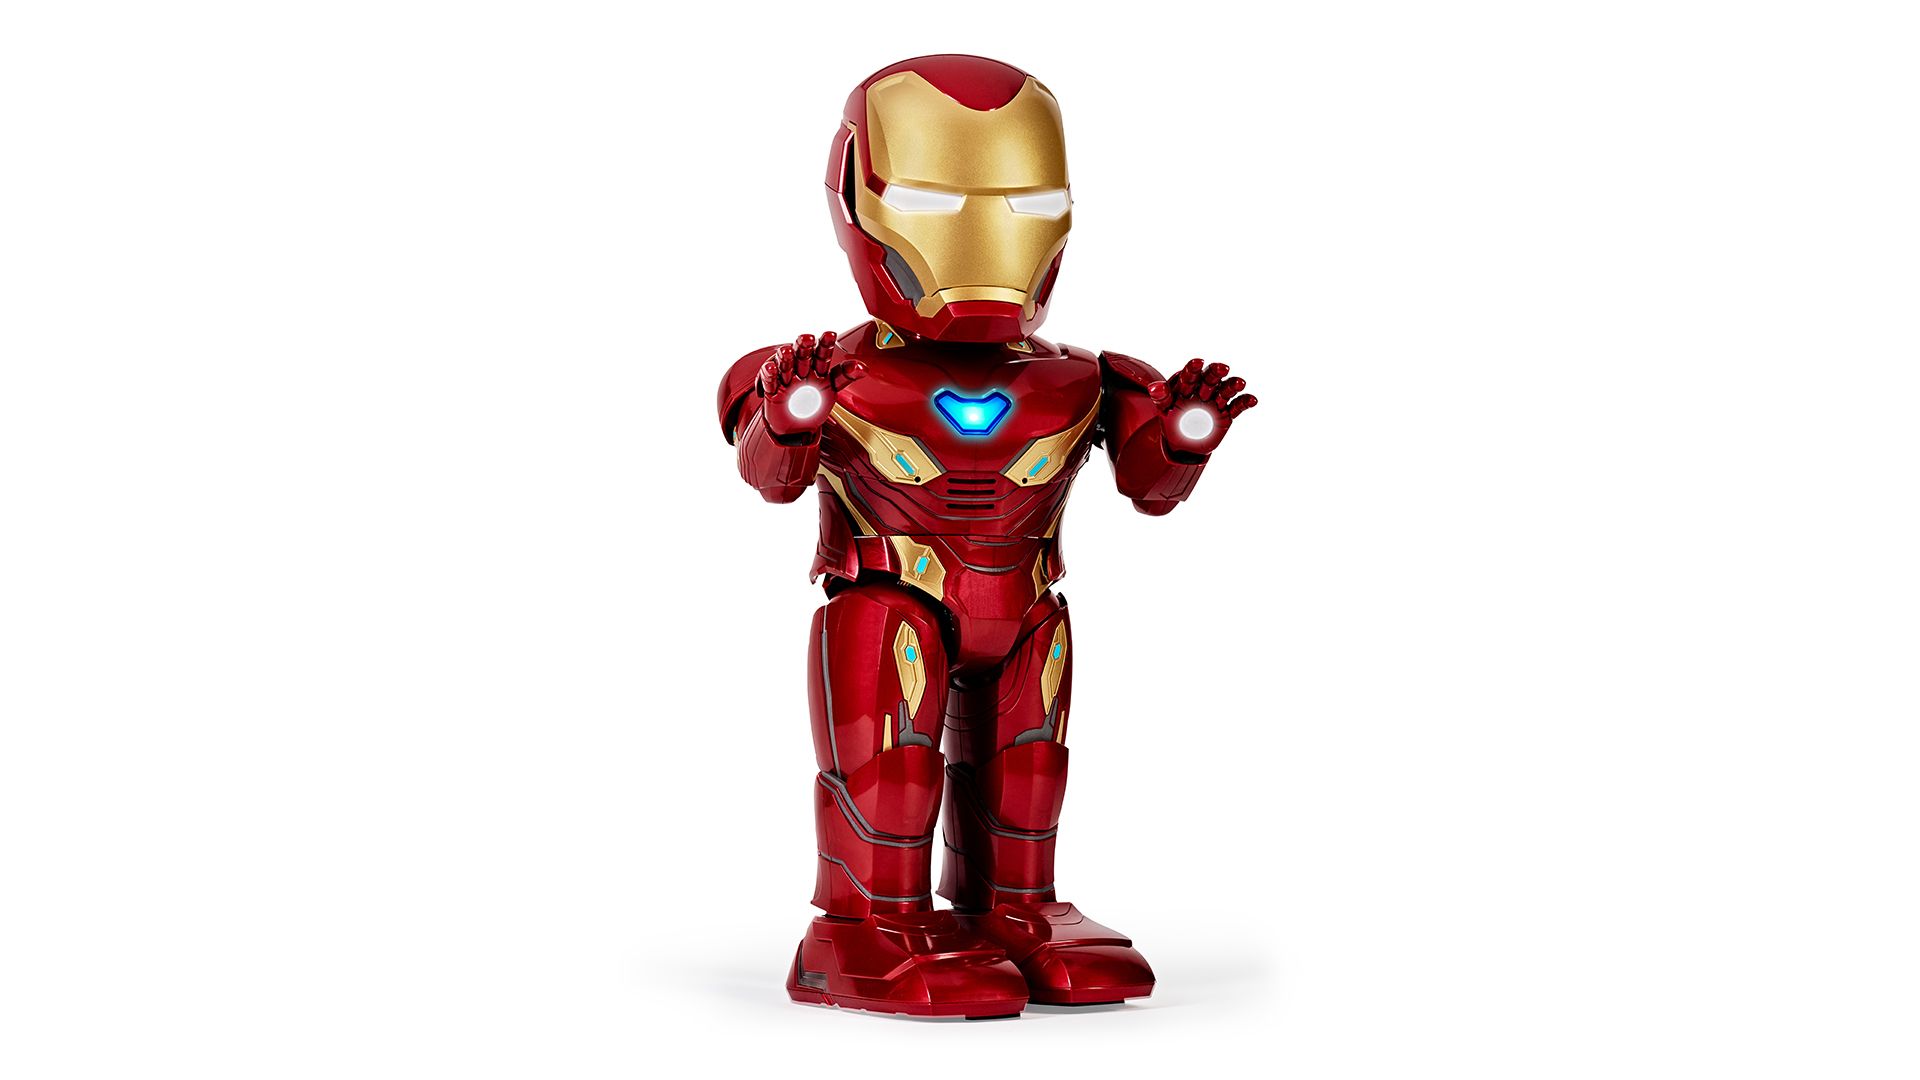 This little Iron Man robot is the kind of 'Avengers: Endgame